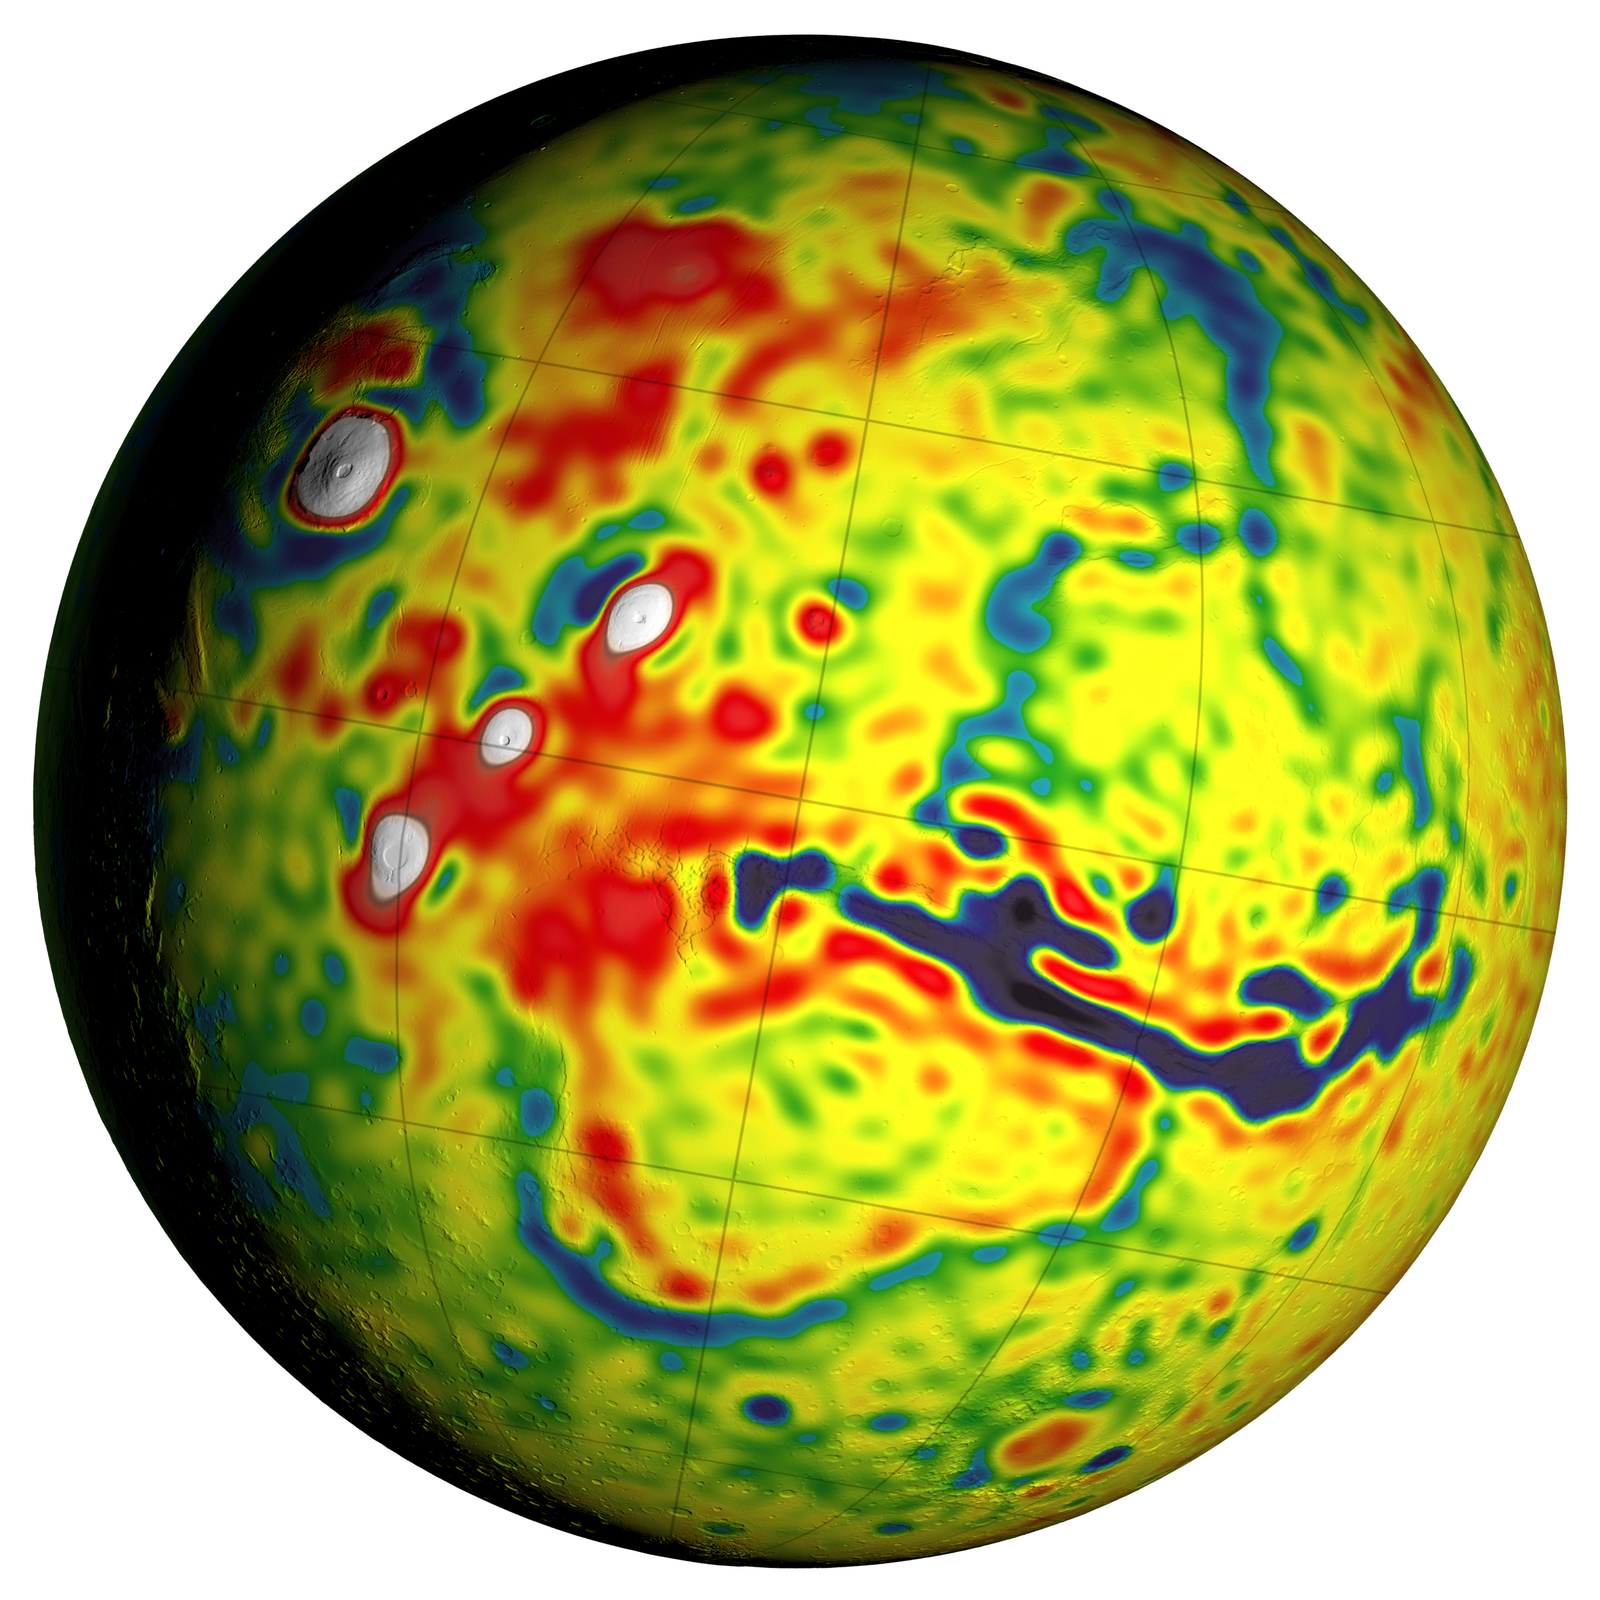 Local Variations in the Gravitational Pull of Mars